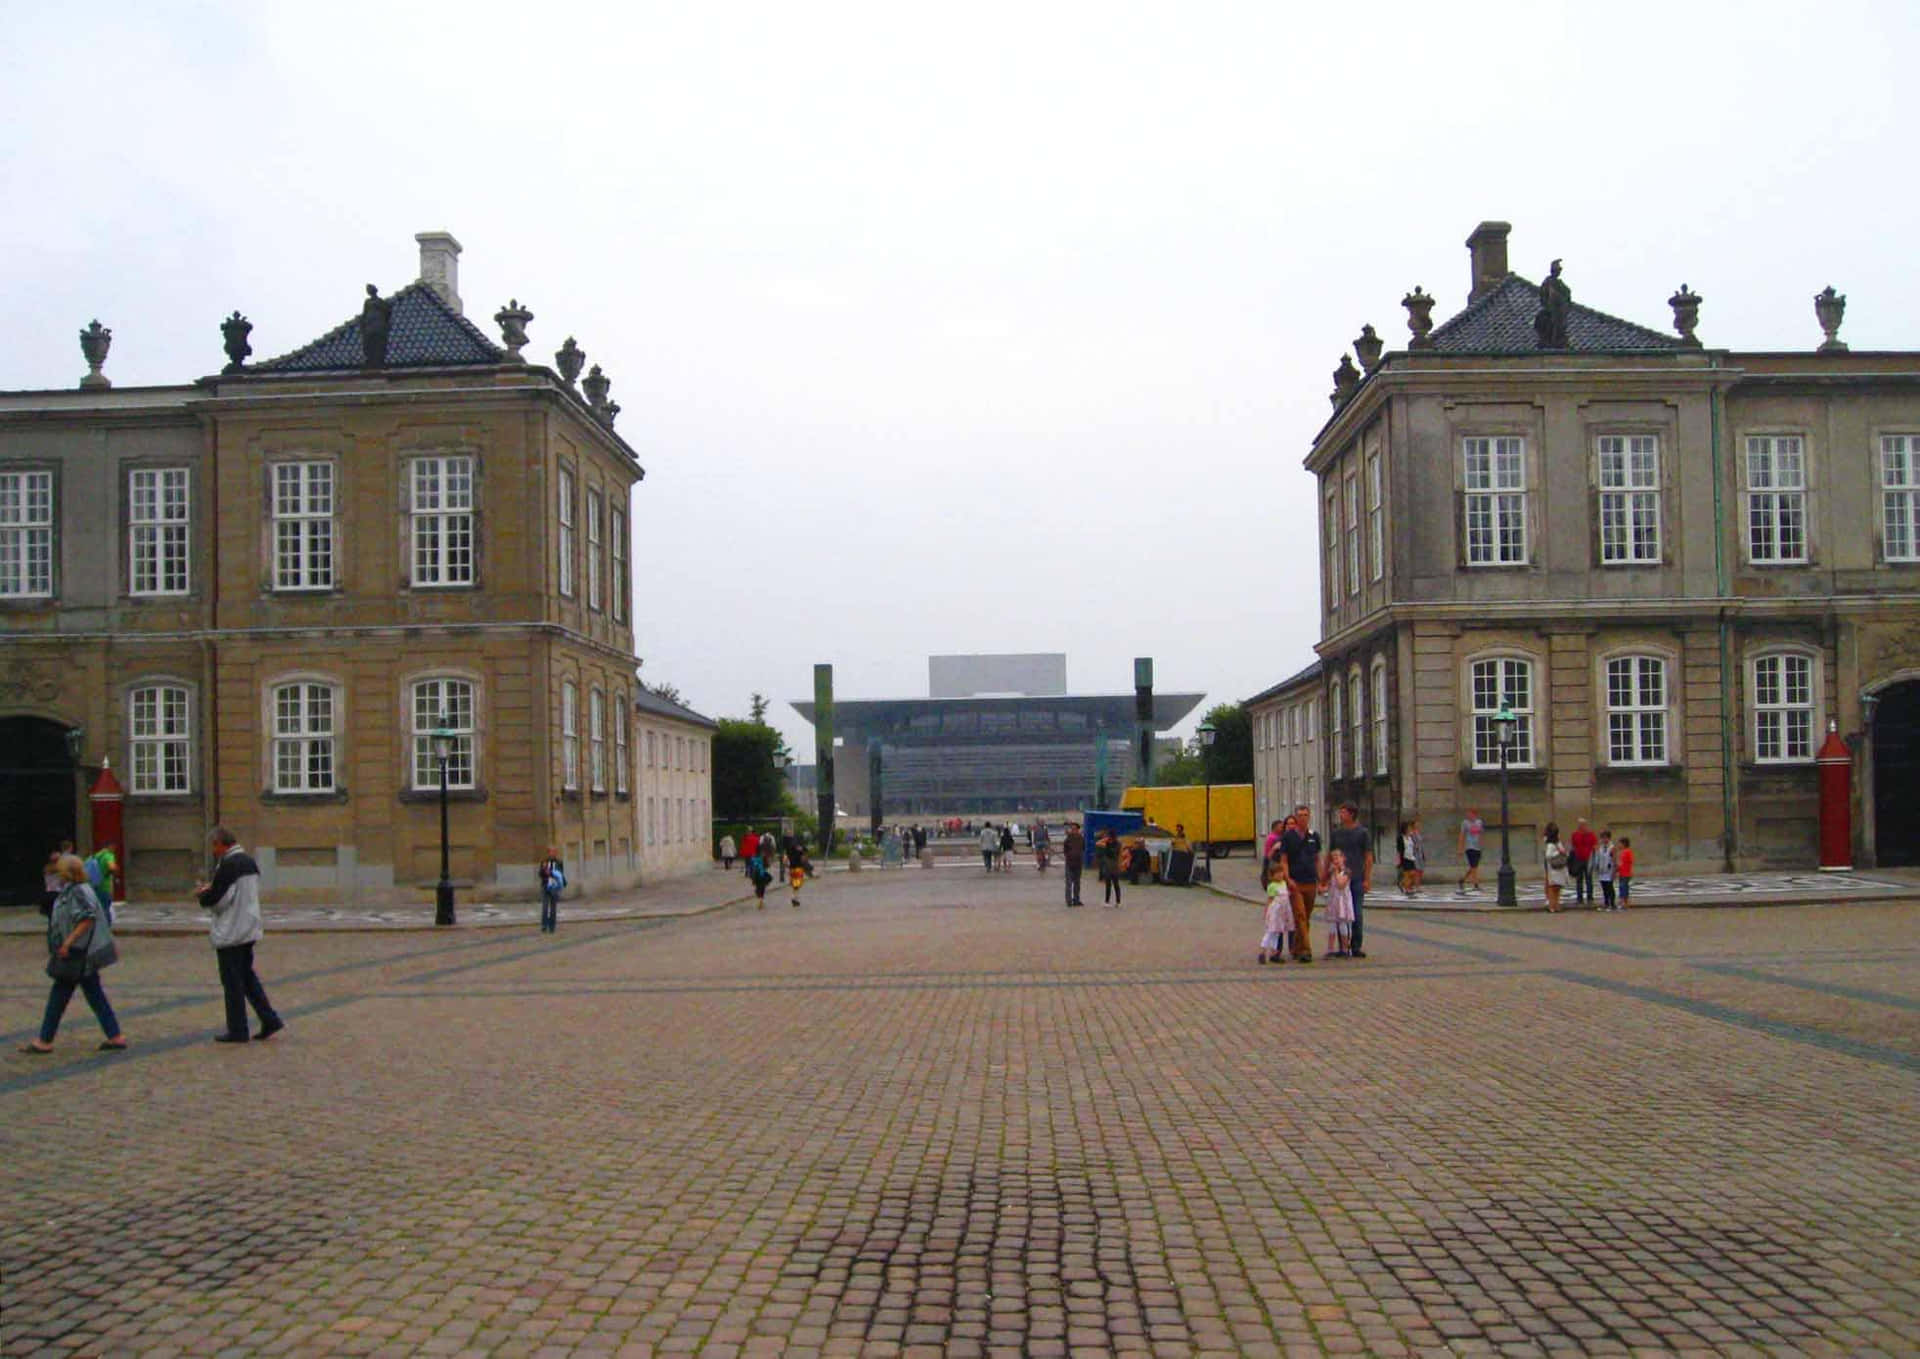 Brockdorff's Palace In Amalienborg Palace's Four Palaces Wallpaper